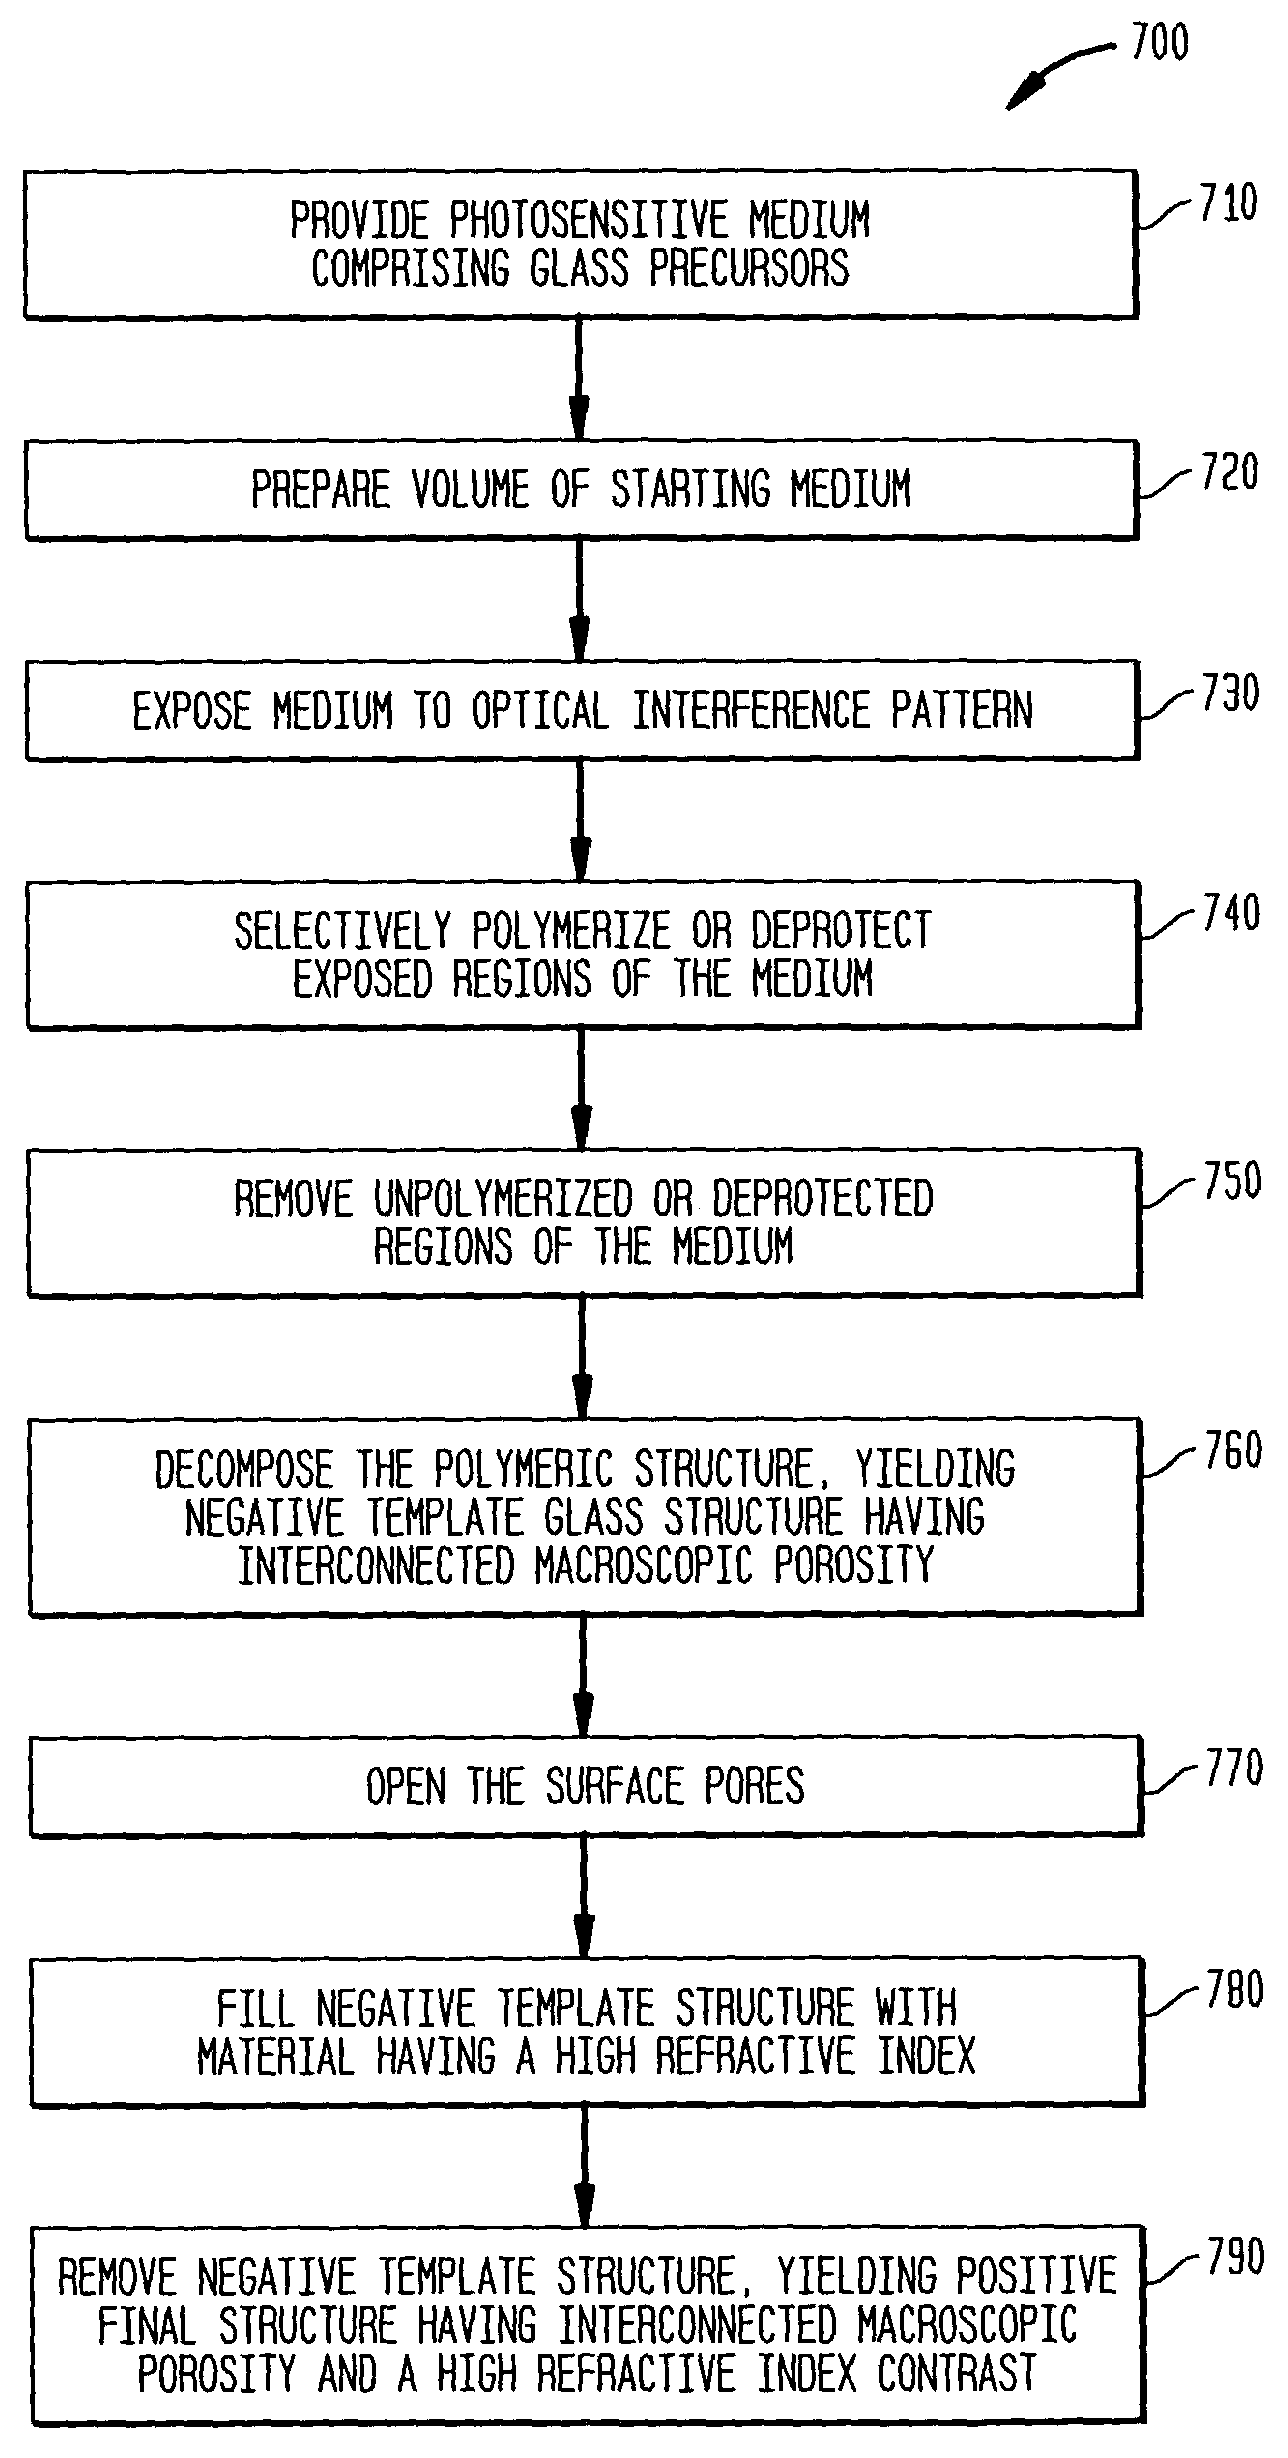 Process for making crystalline structures having interconnected pores and high refractive index contrasts